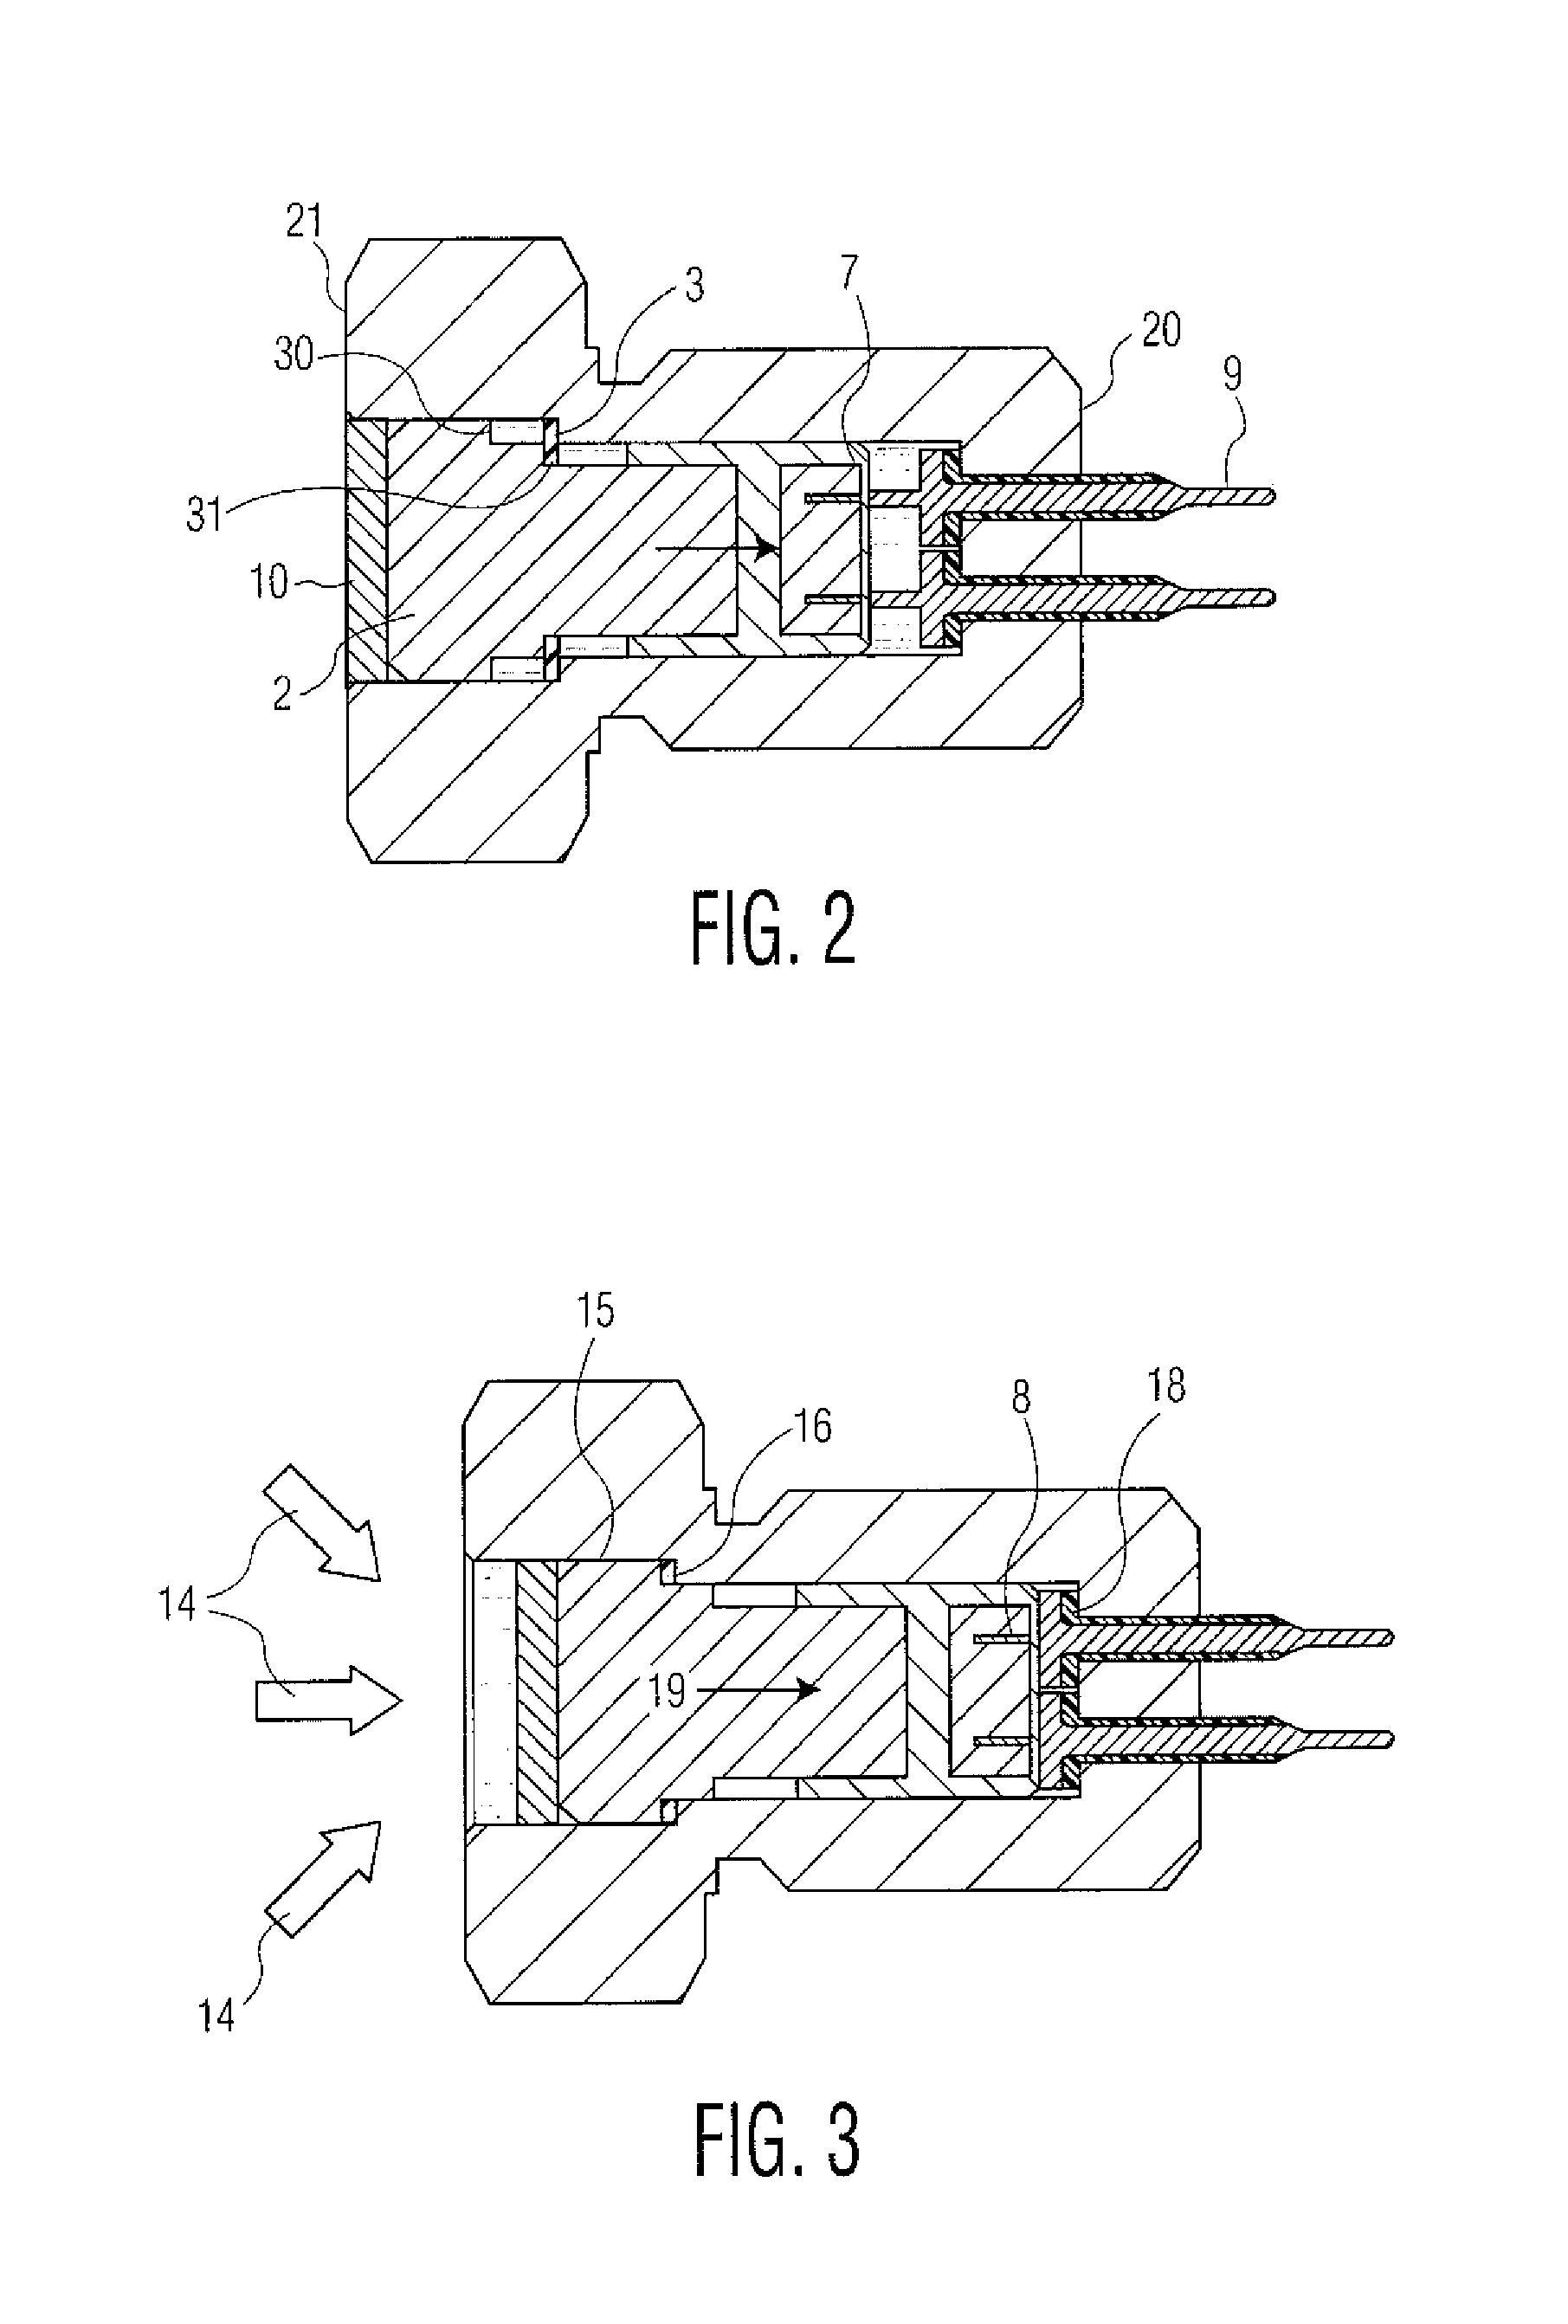 High pressure isolated latching safety switch device